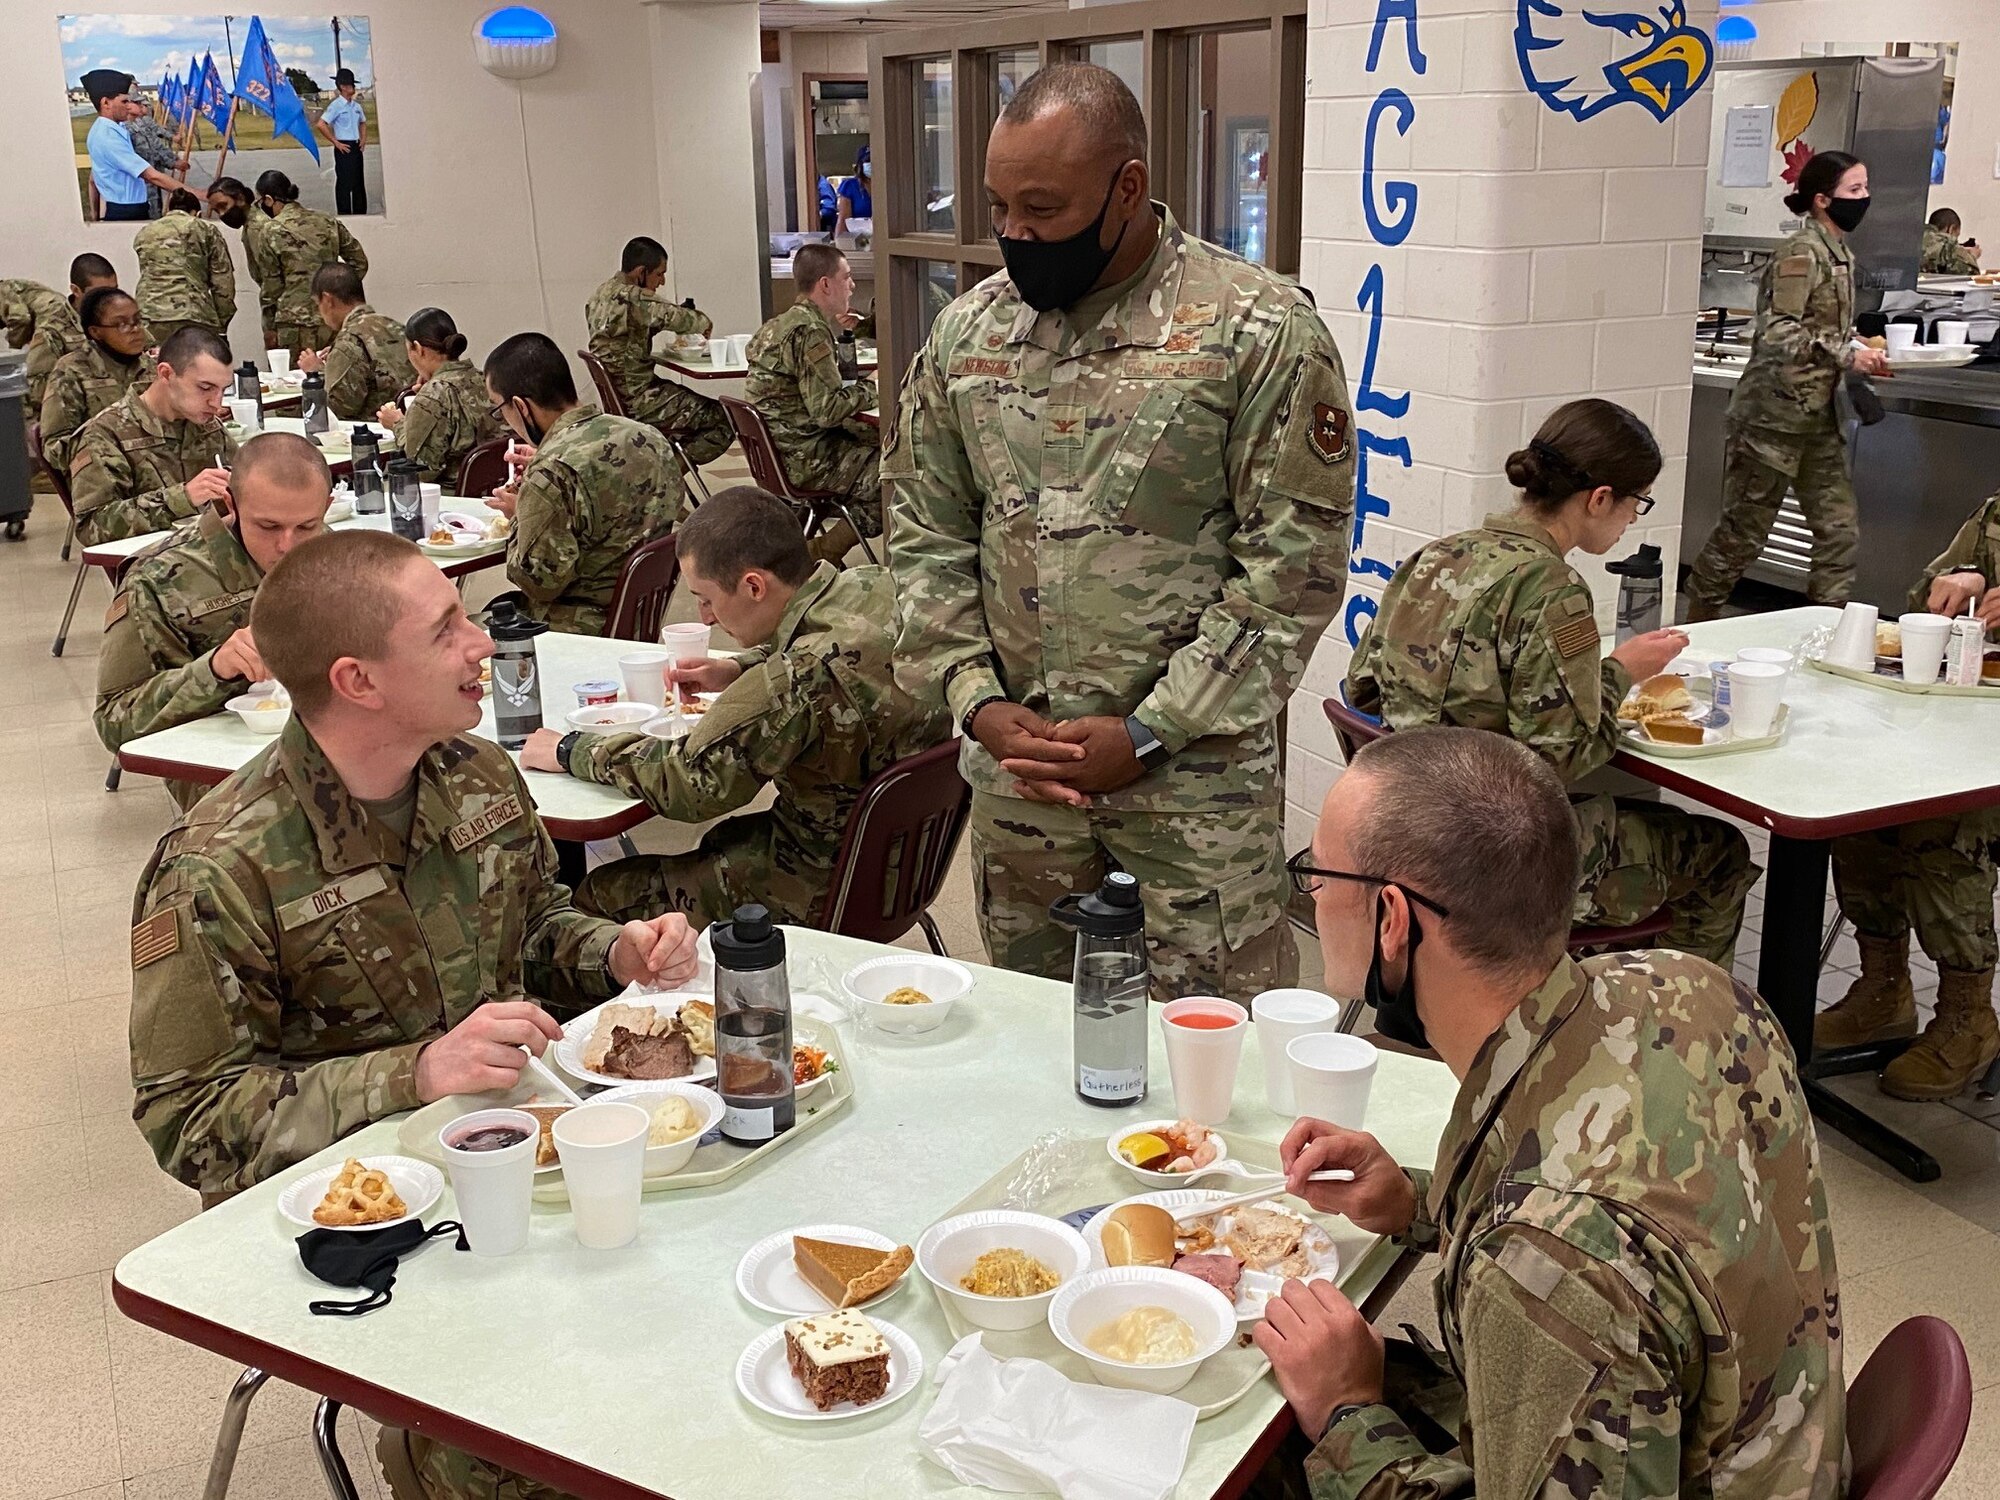 Airmen who graduated from Basic Military Training on Nov. 25 enjoy their first Thanksgiving meal in uniform at Joint Base San Antonio-Lackland, Texas, on Nov. 26.